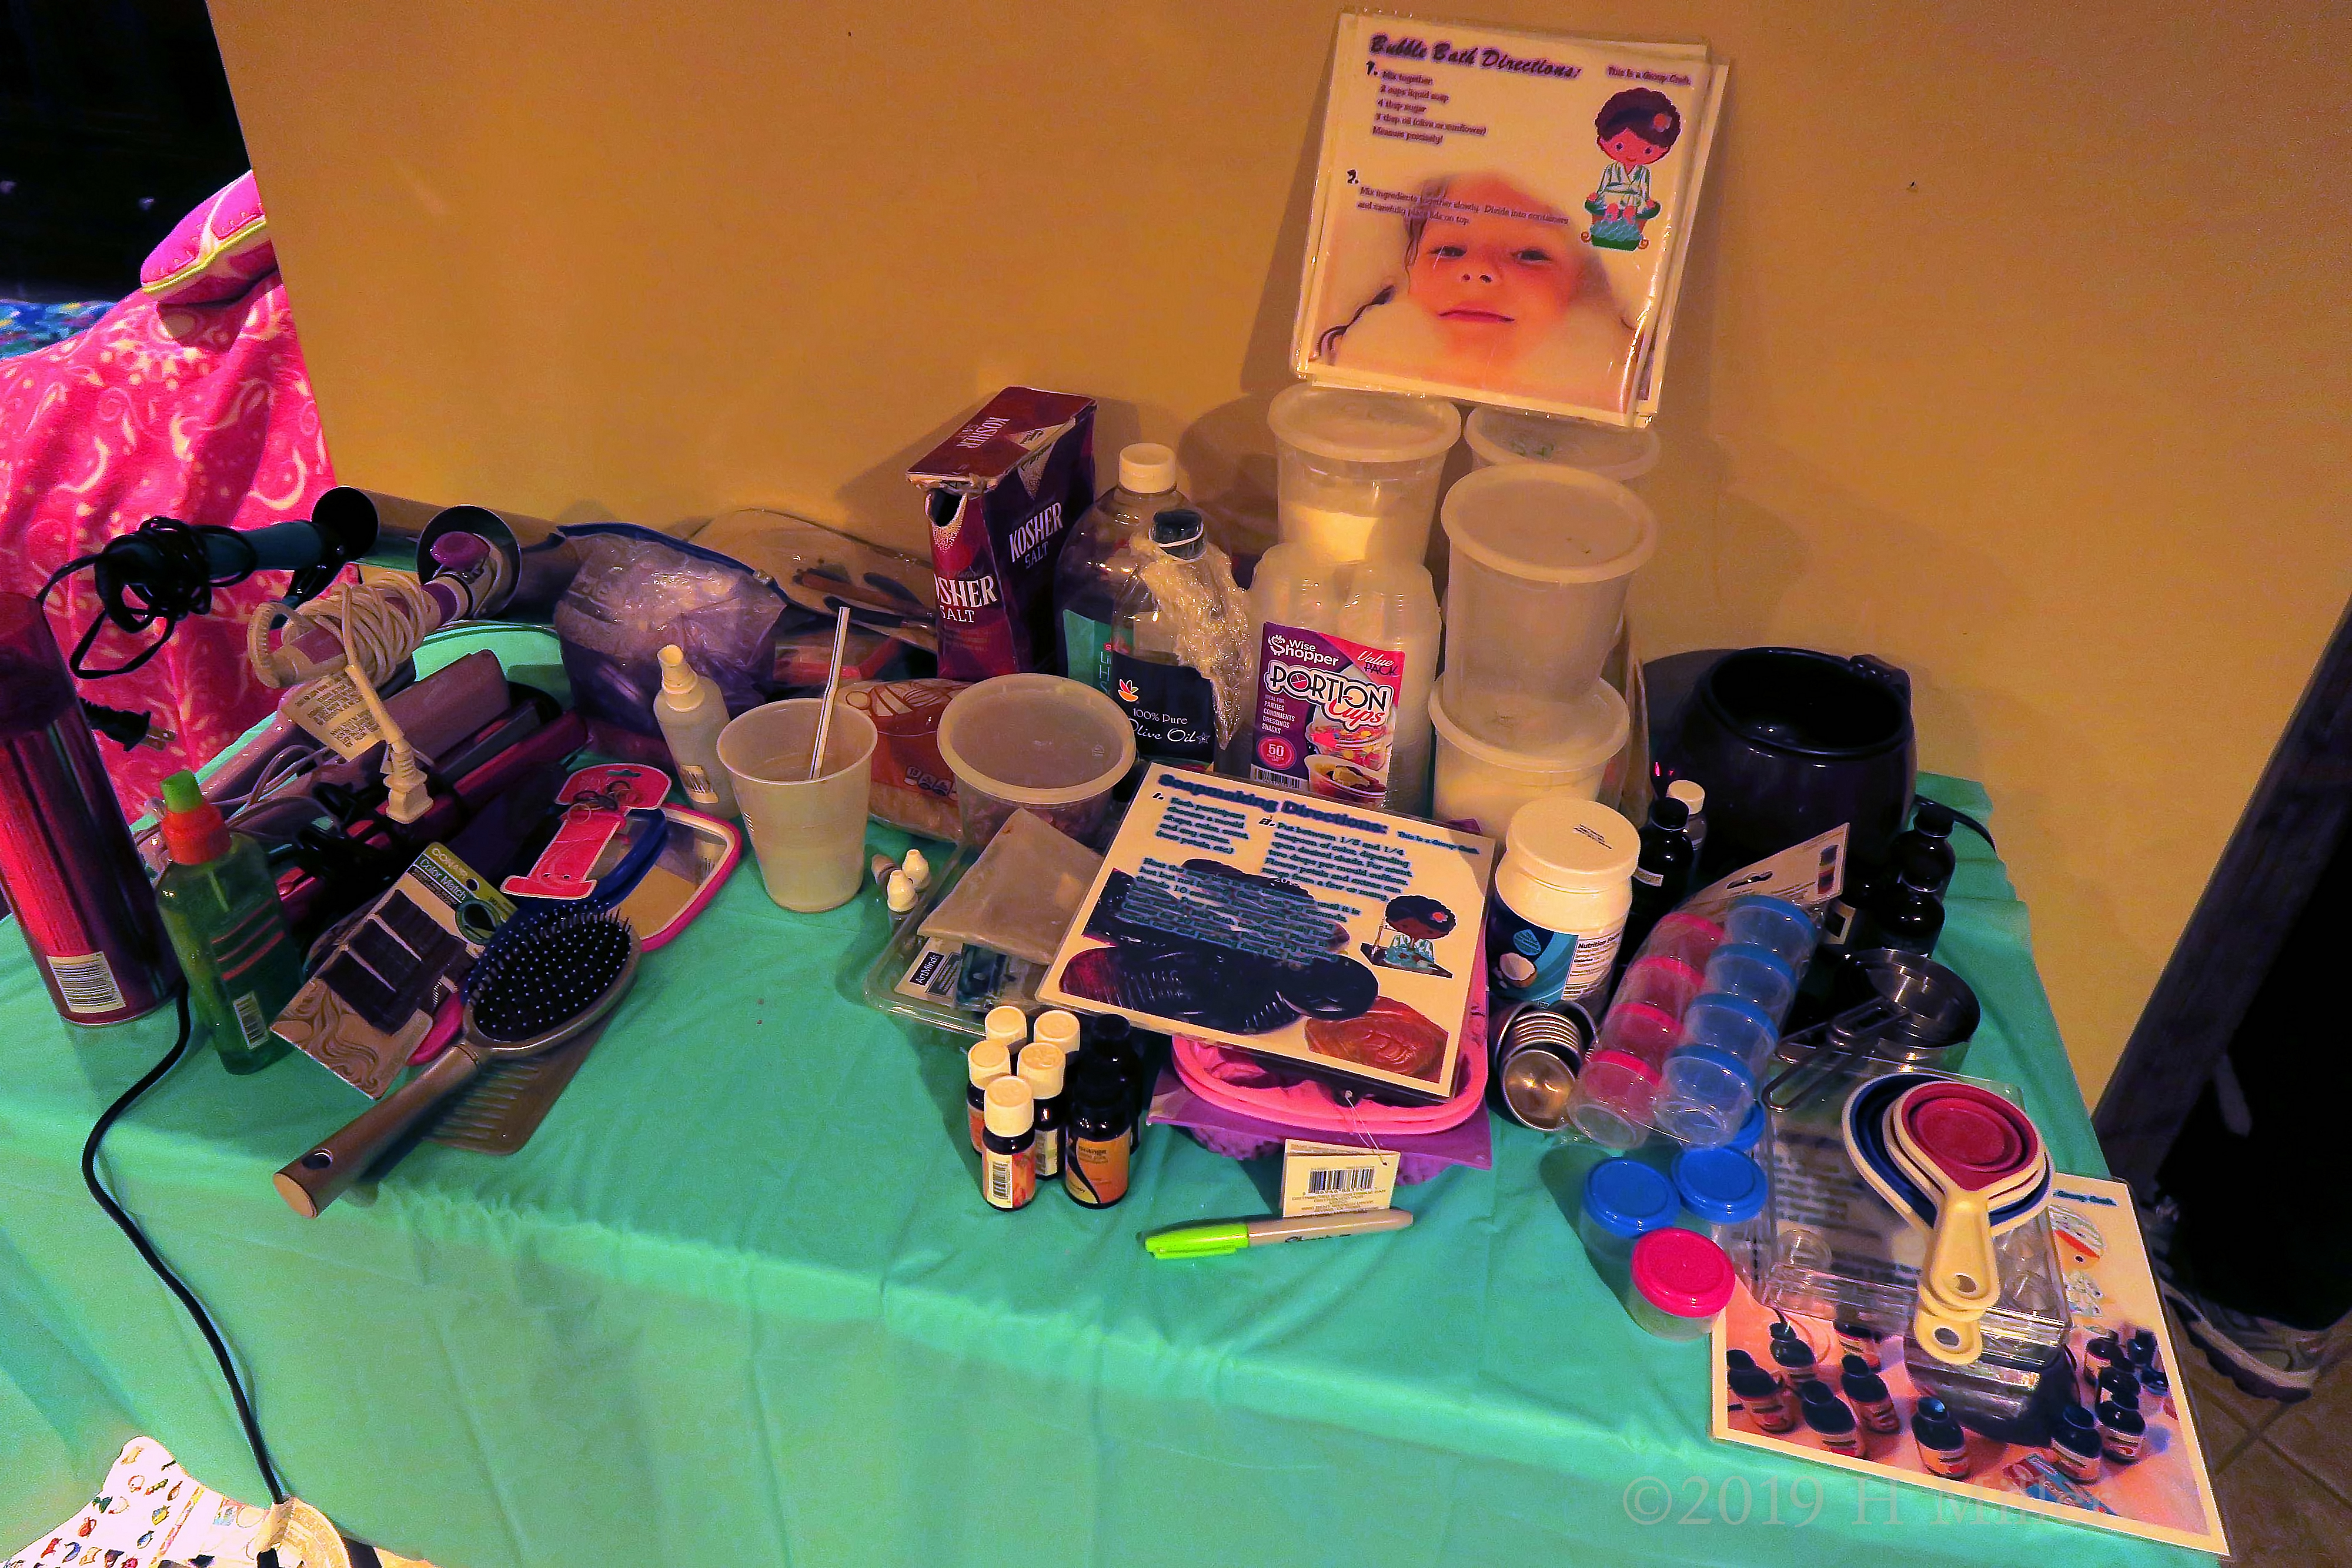 Amazing Kids Hair Salon Station At The Girls Spa Party 4